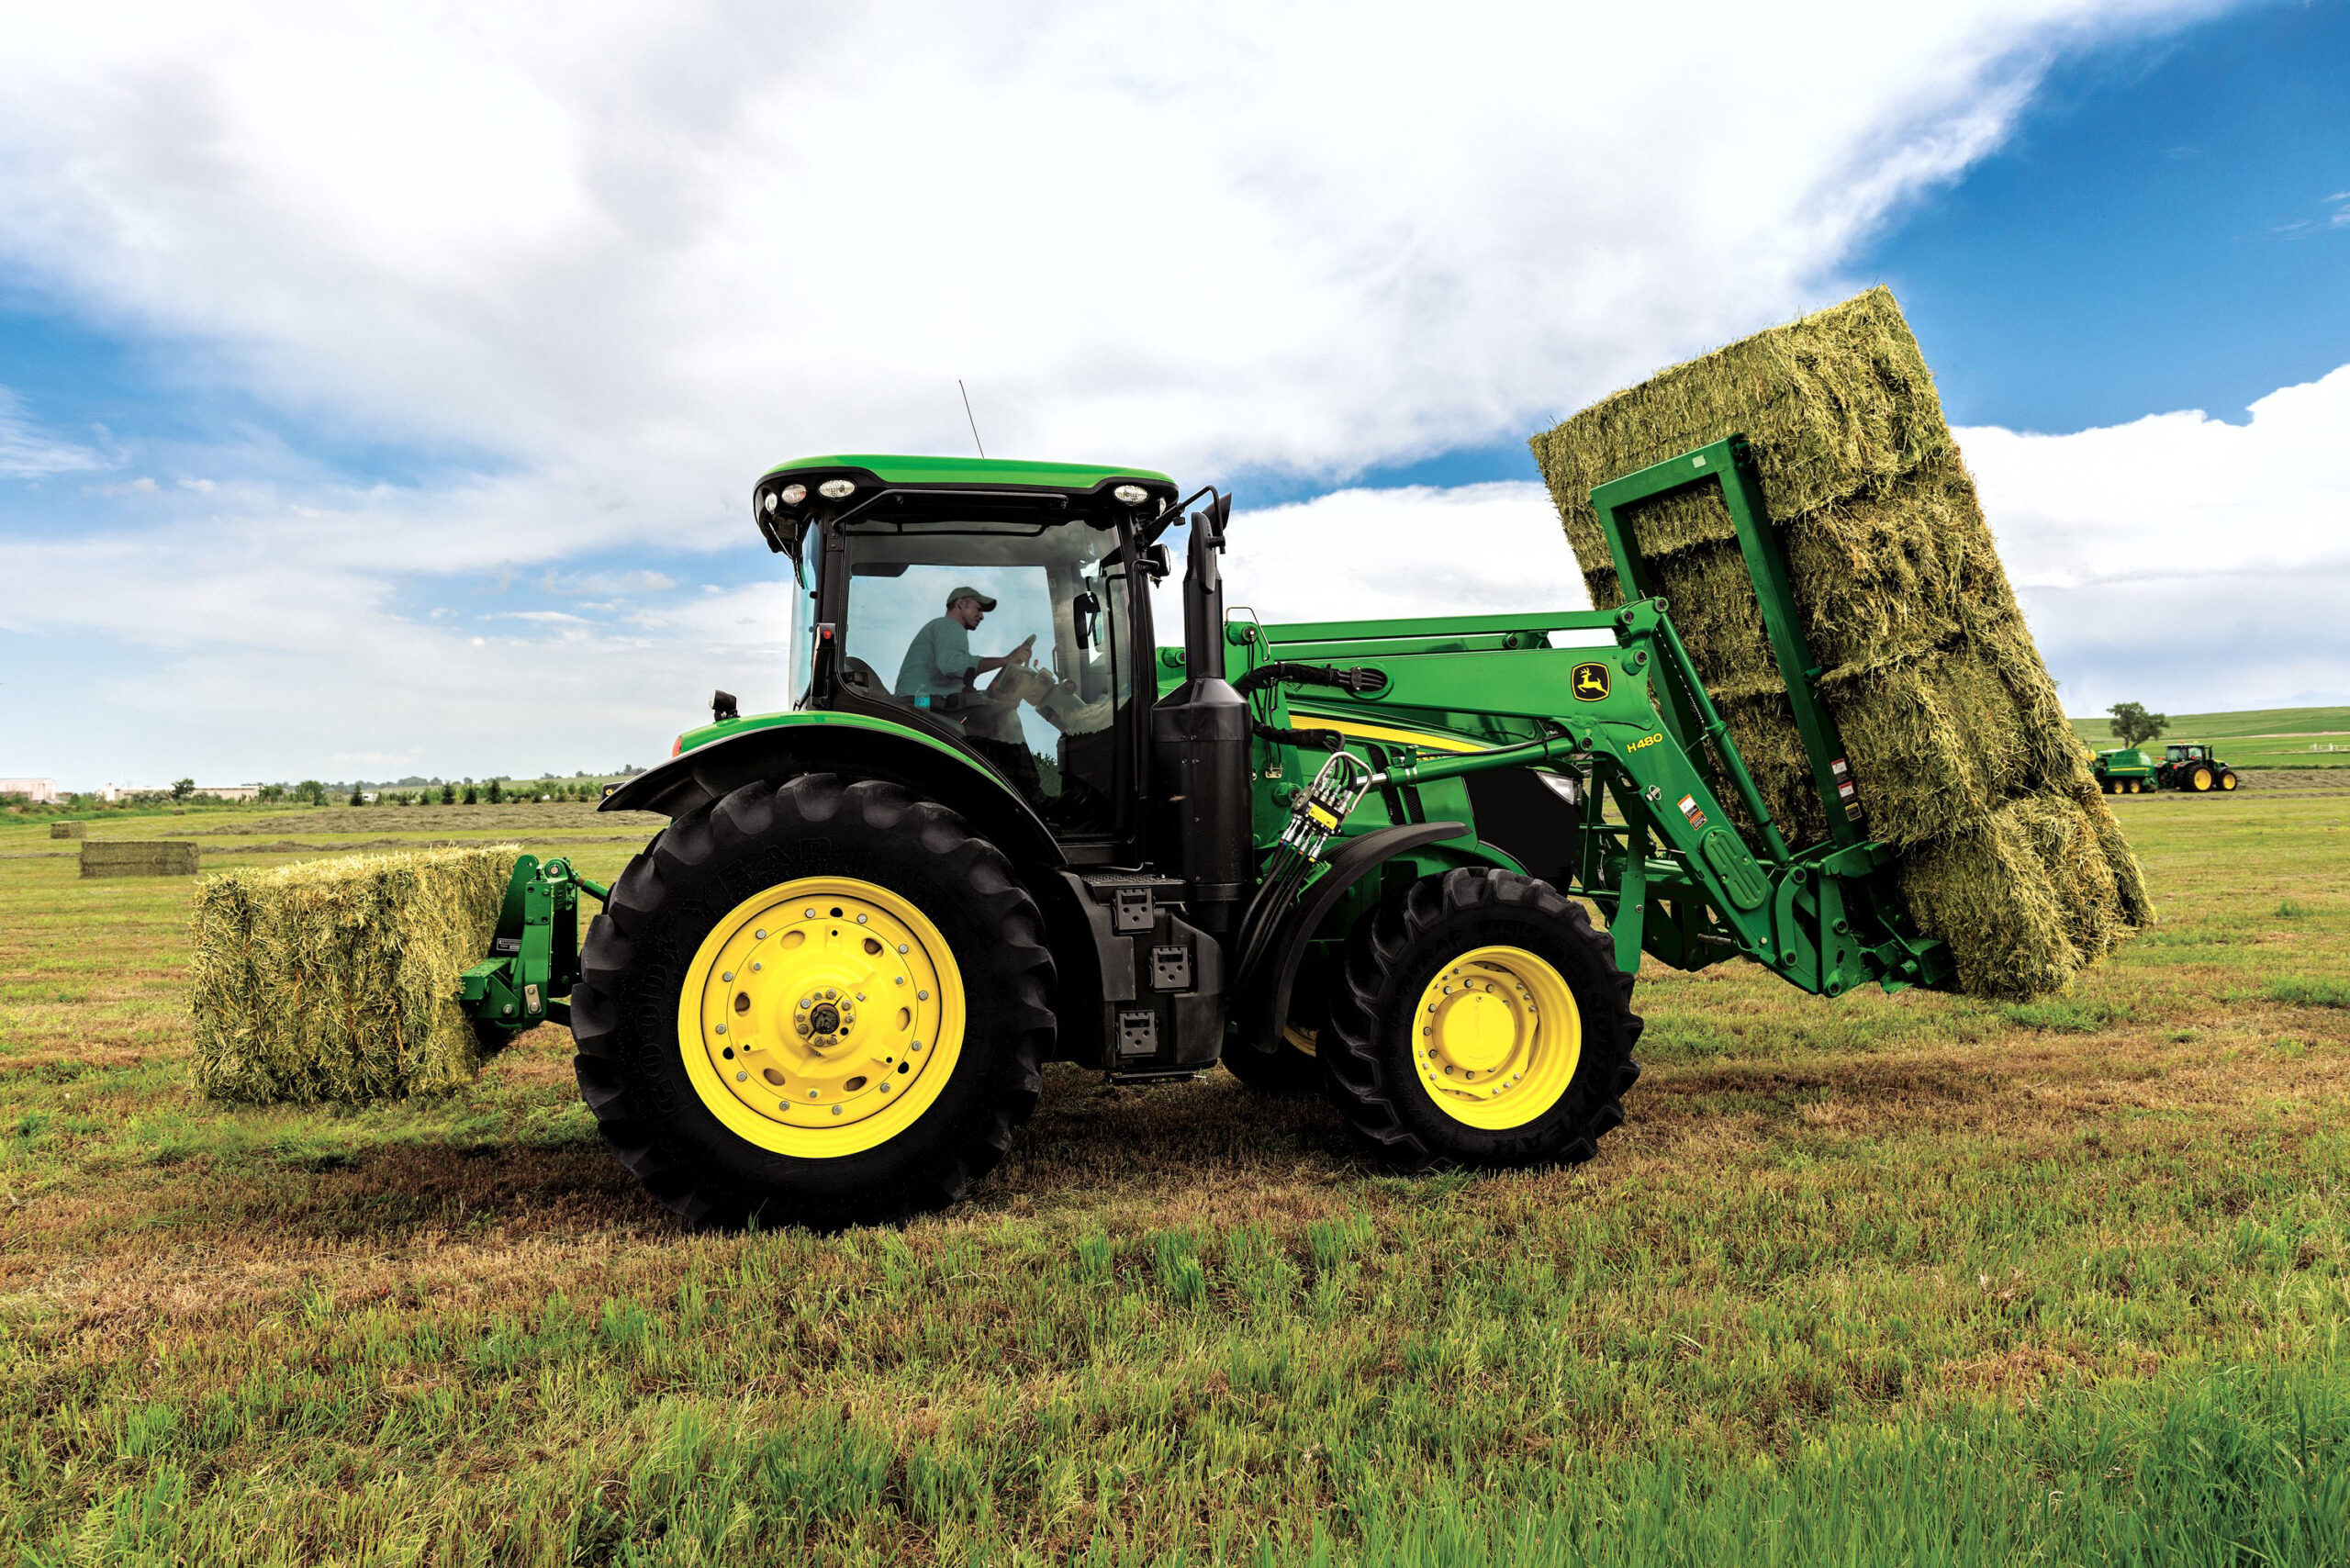 Best Tips to Buy Latest Farm Tractors - Complete Guide